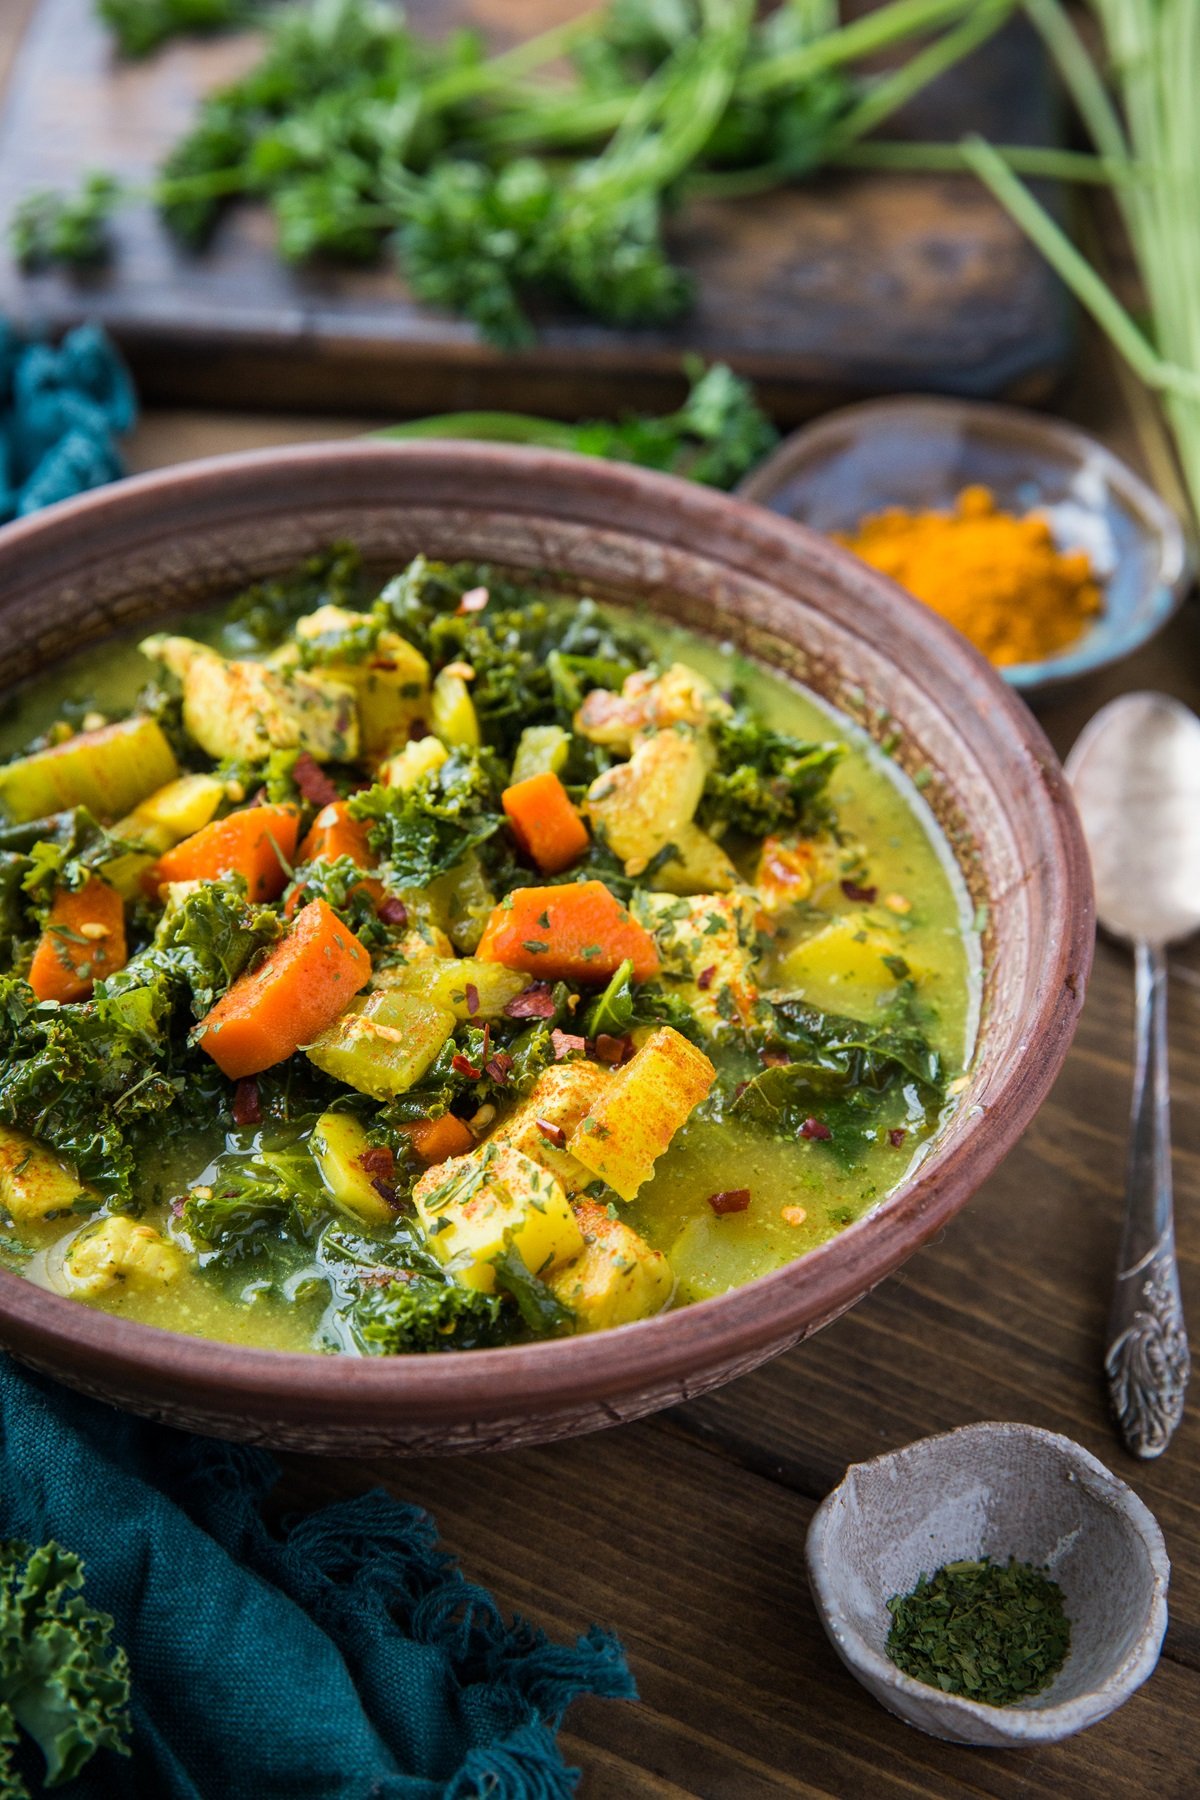 Immunity-Boosting Turmeric Chicken Soup with carrots, parsnips, parsley, ginger, and bone broth - a powerhouse meal that is paleo, whole30, and keto. | TheRoastedRoot.com #glutenfree #healthy #paleo